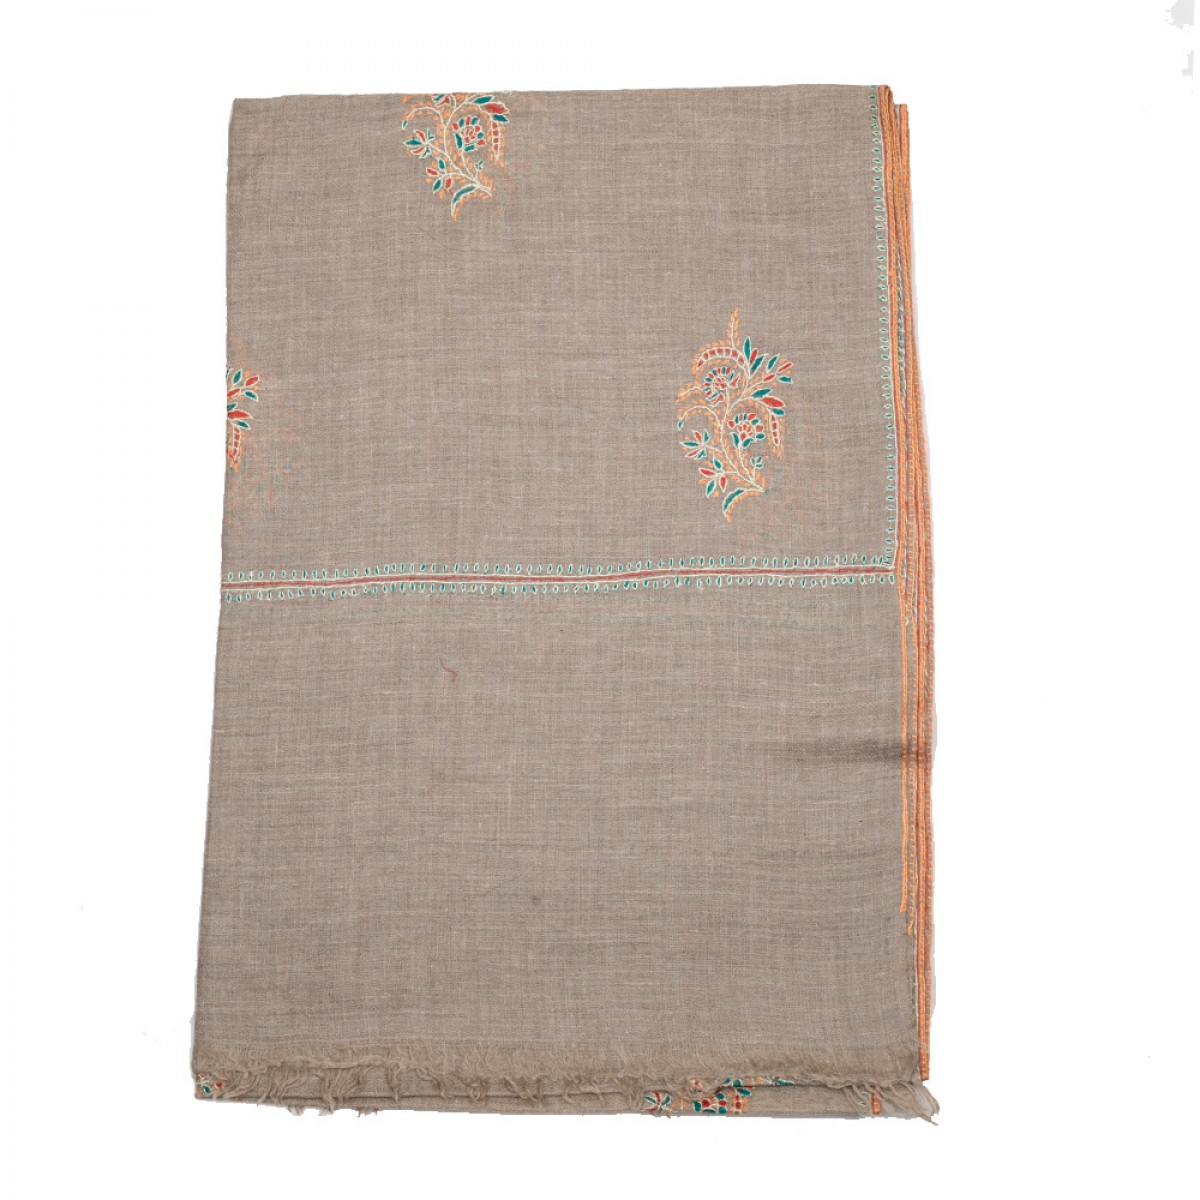 Embroidered Pashmina Stole - Natural & Red